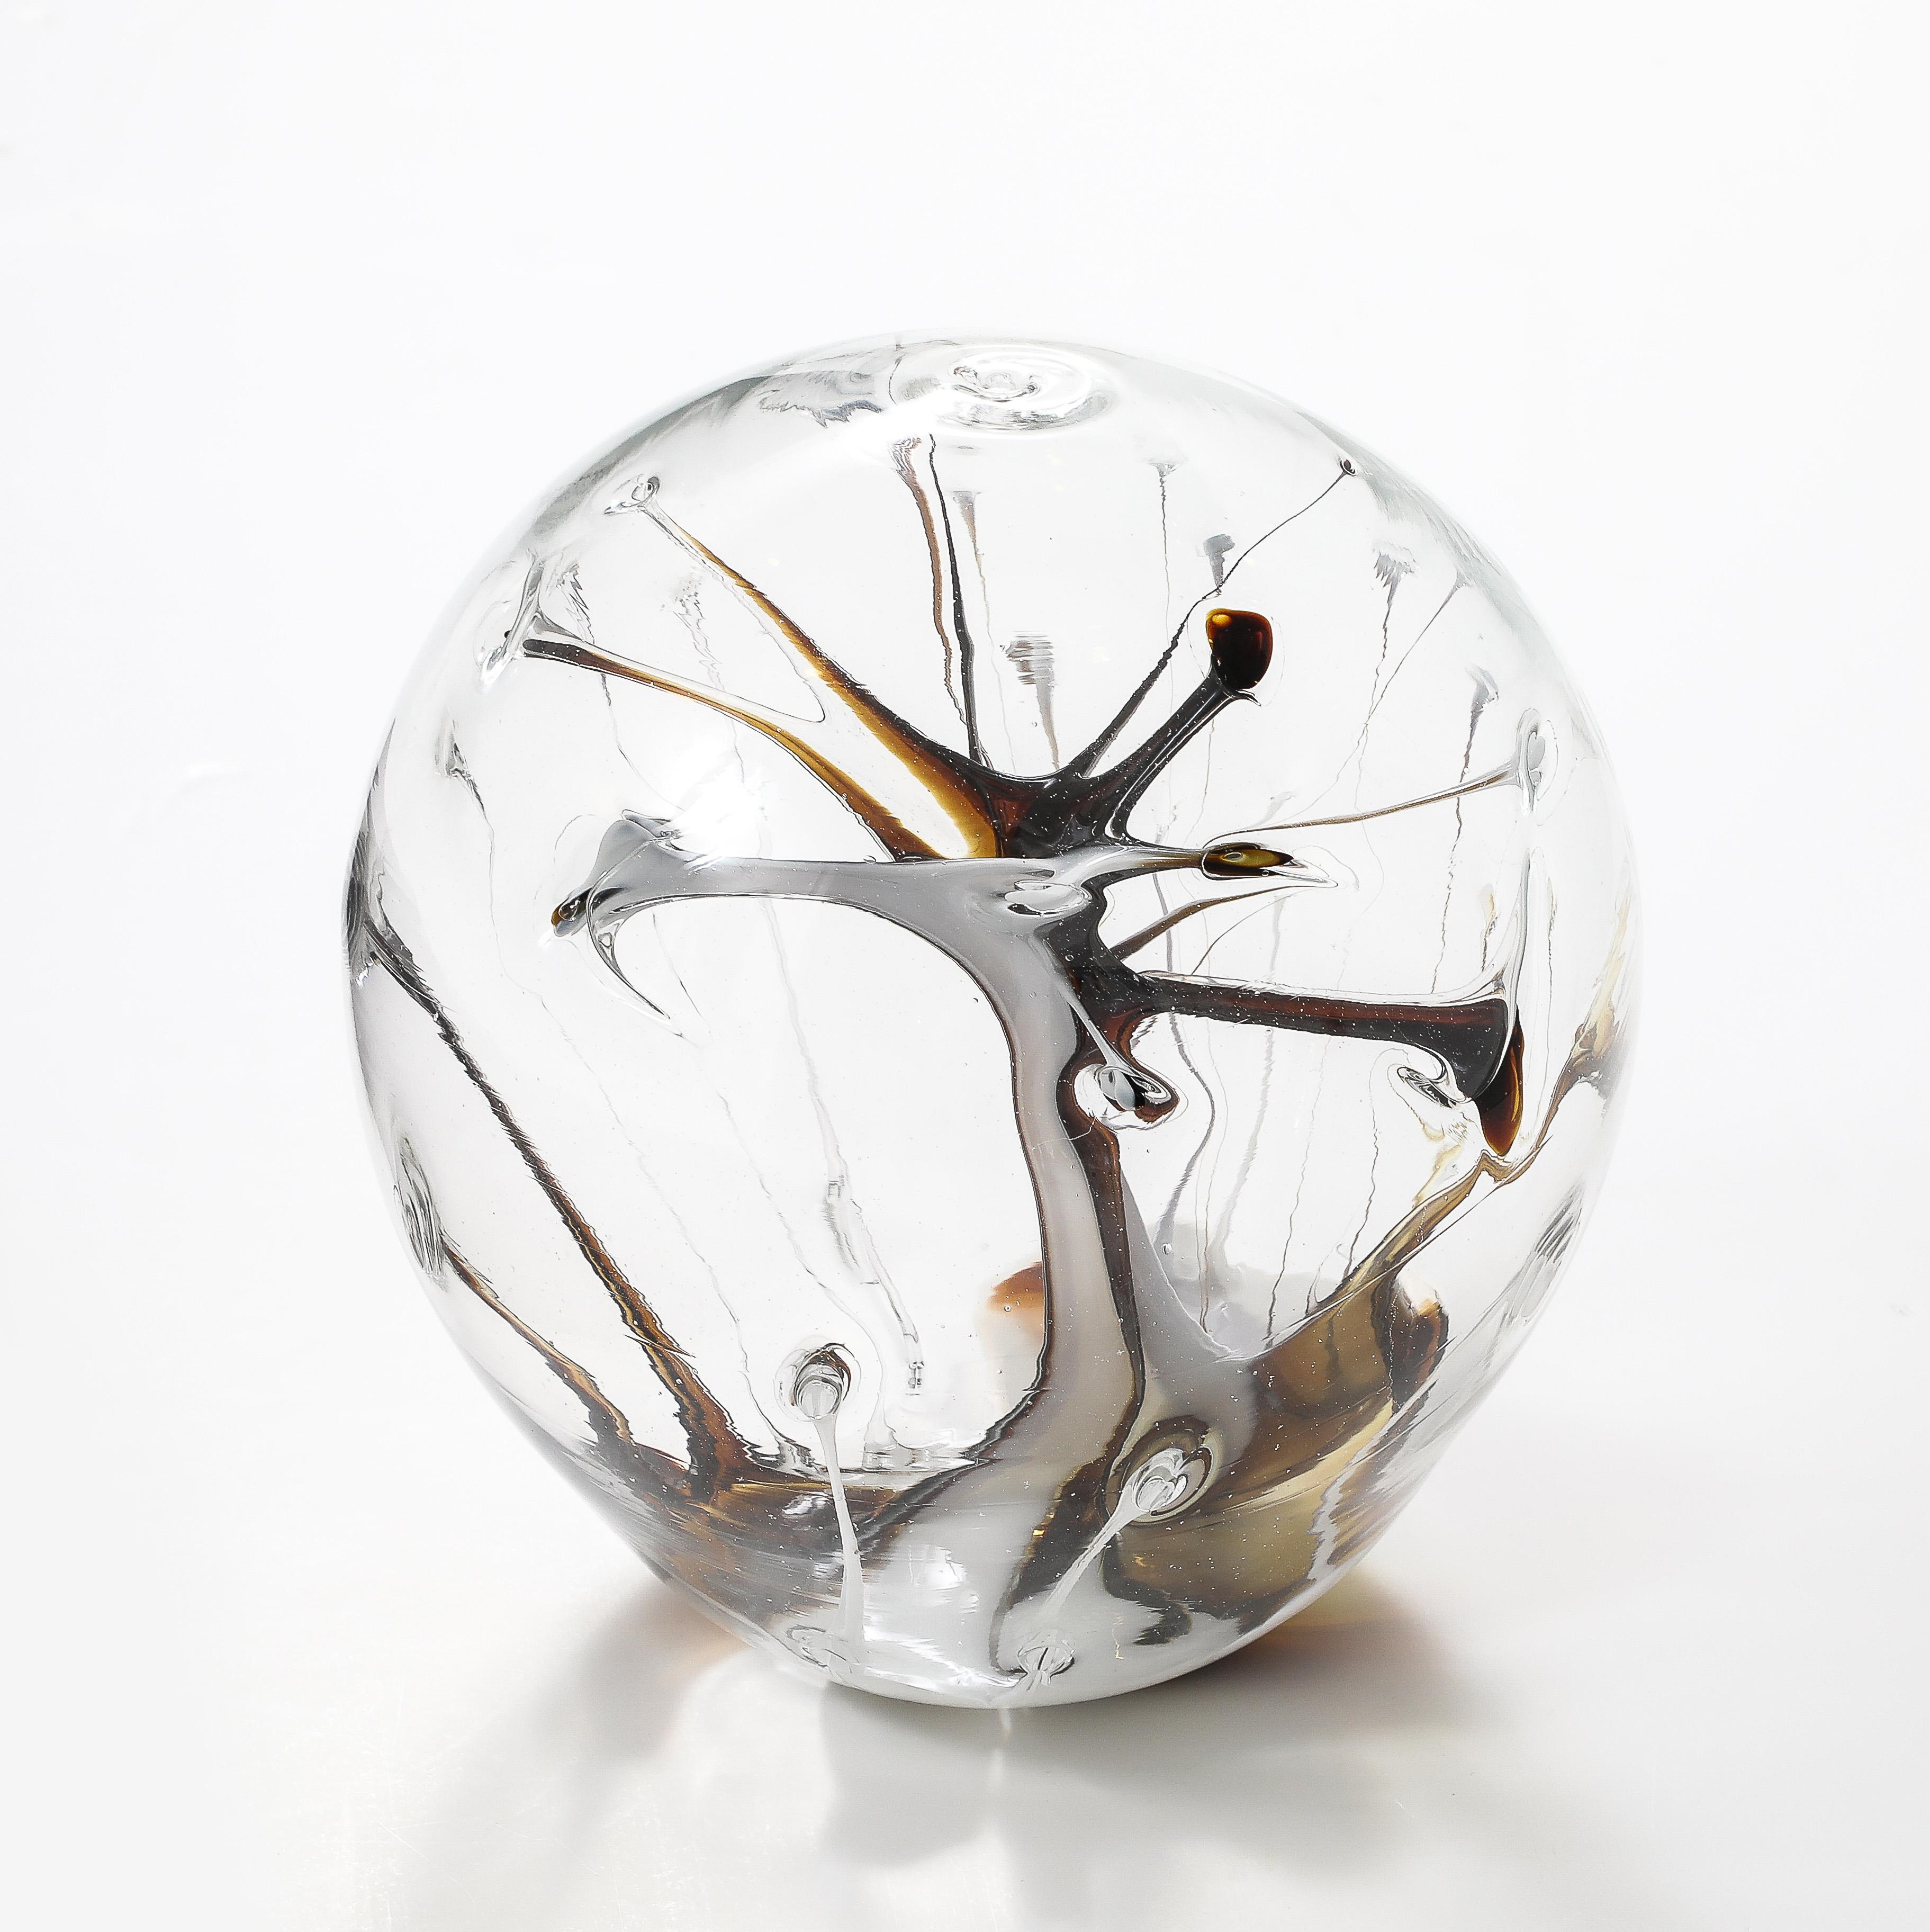 Large Peter Bramhall glass Orb sculpture, titled 